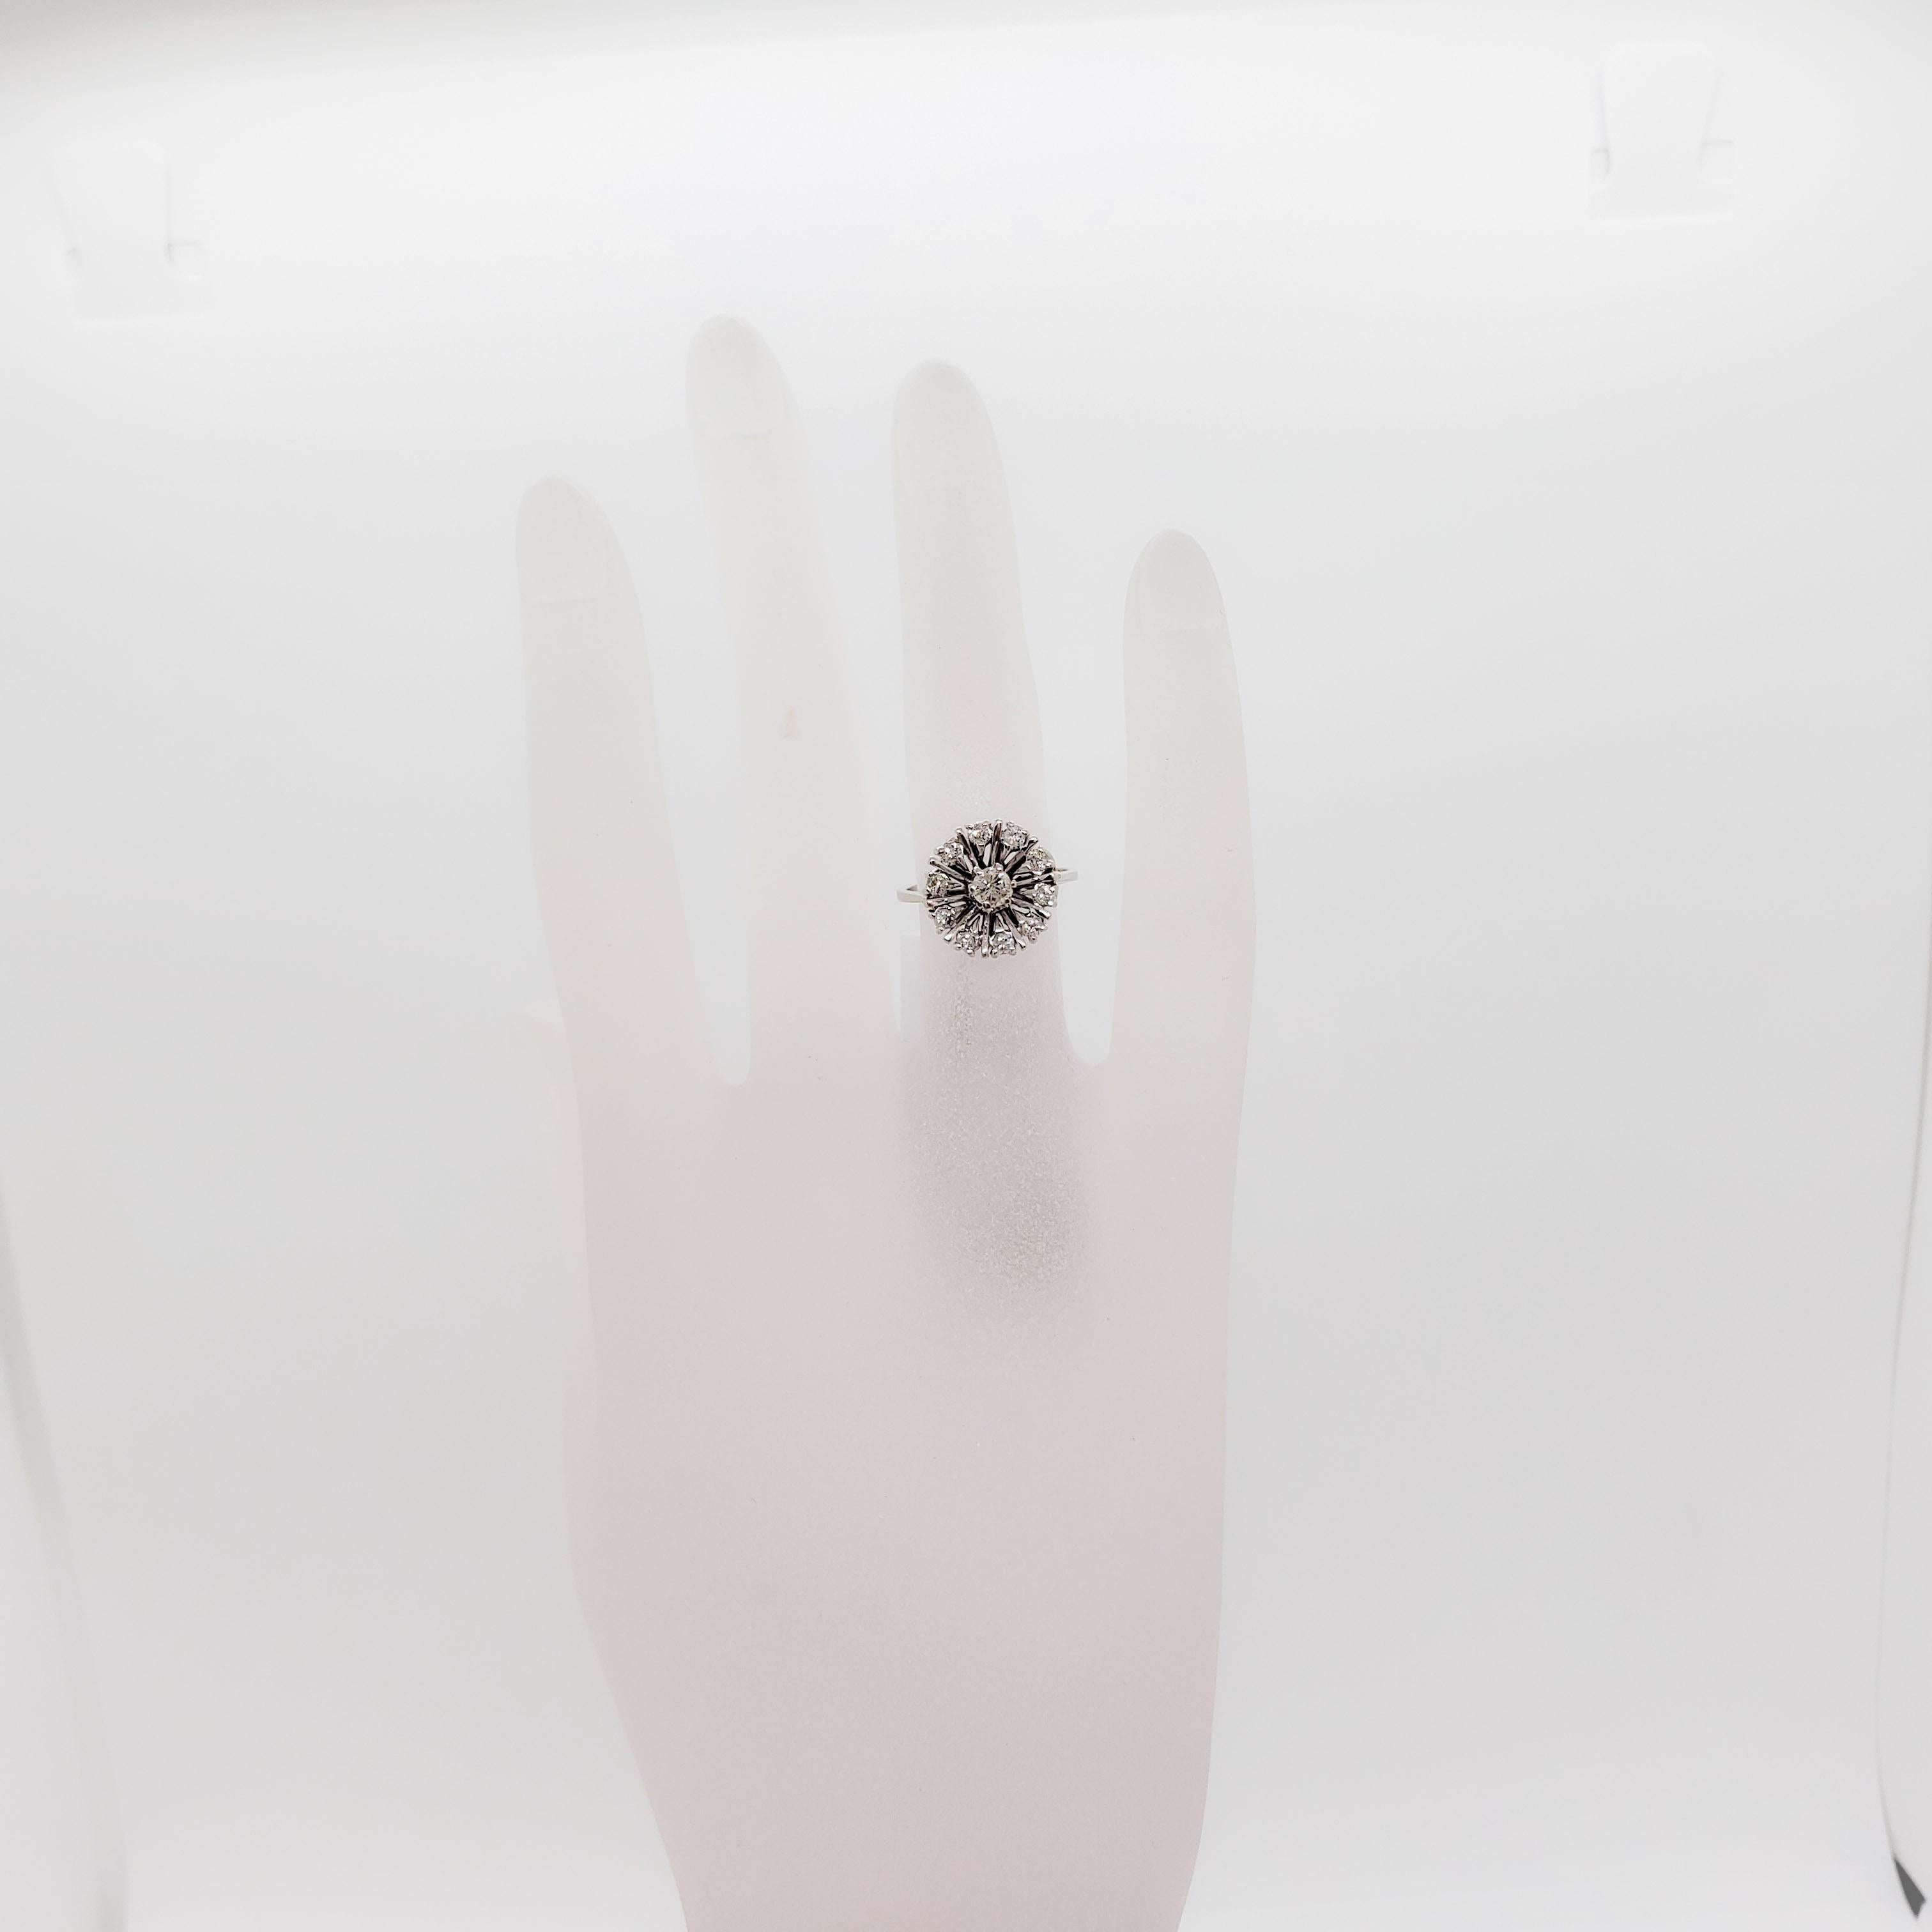 Beautiful flower design ring with good quality white diamond rounds in a handmade 14k white gold mounting.  Ring size 5.25.  Excellent condition.